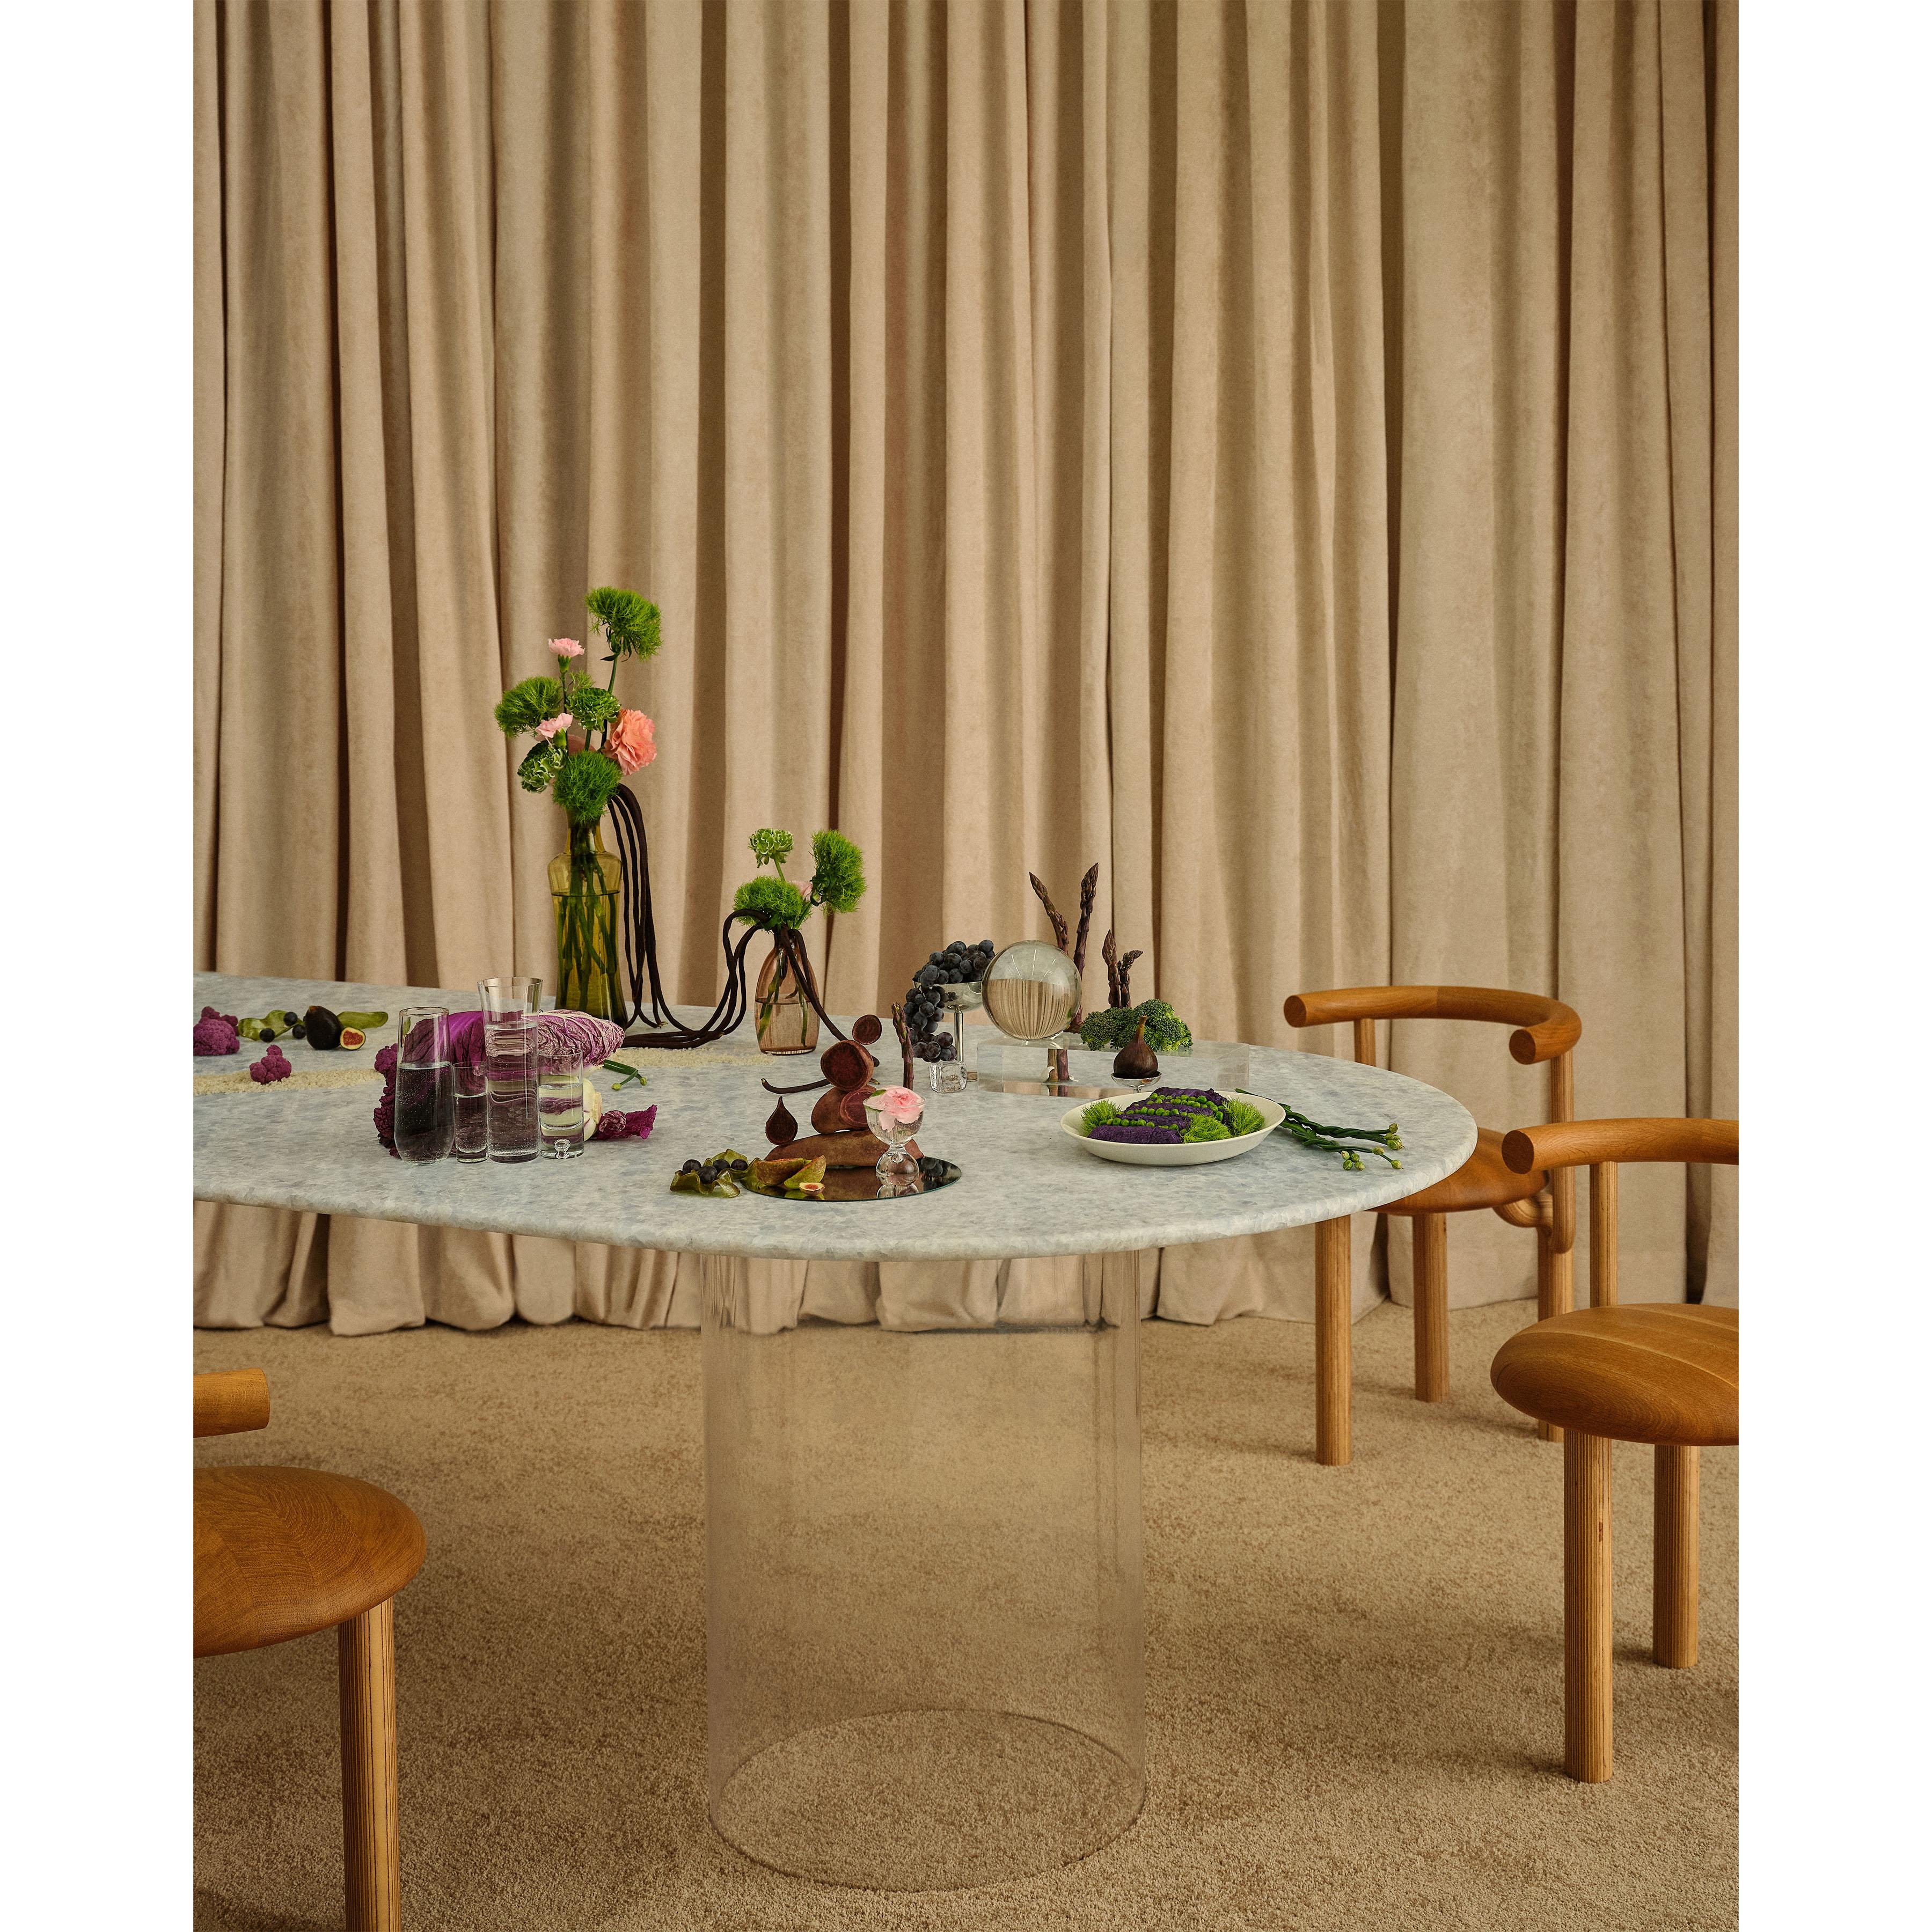 This pill-shaped dining table was originally designed for the Pieces Homes shoppable Airbnb in Kennebunk, Maine. The marble surface rests on top of a metal frame with collars that hold the plexi acrylic bases in place. Transparent bases give the